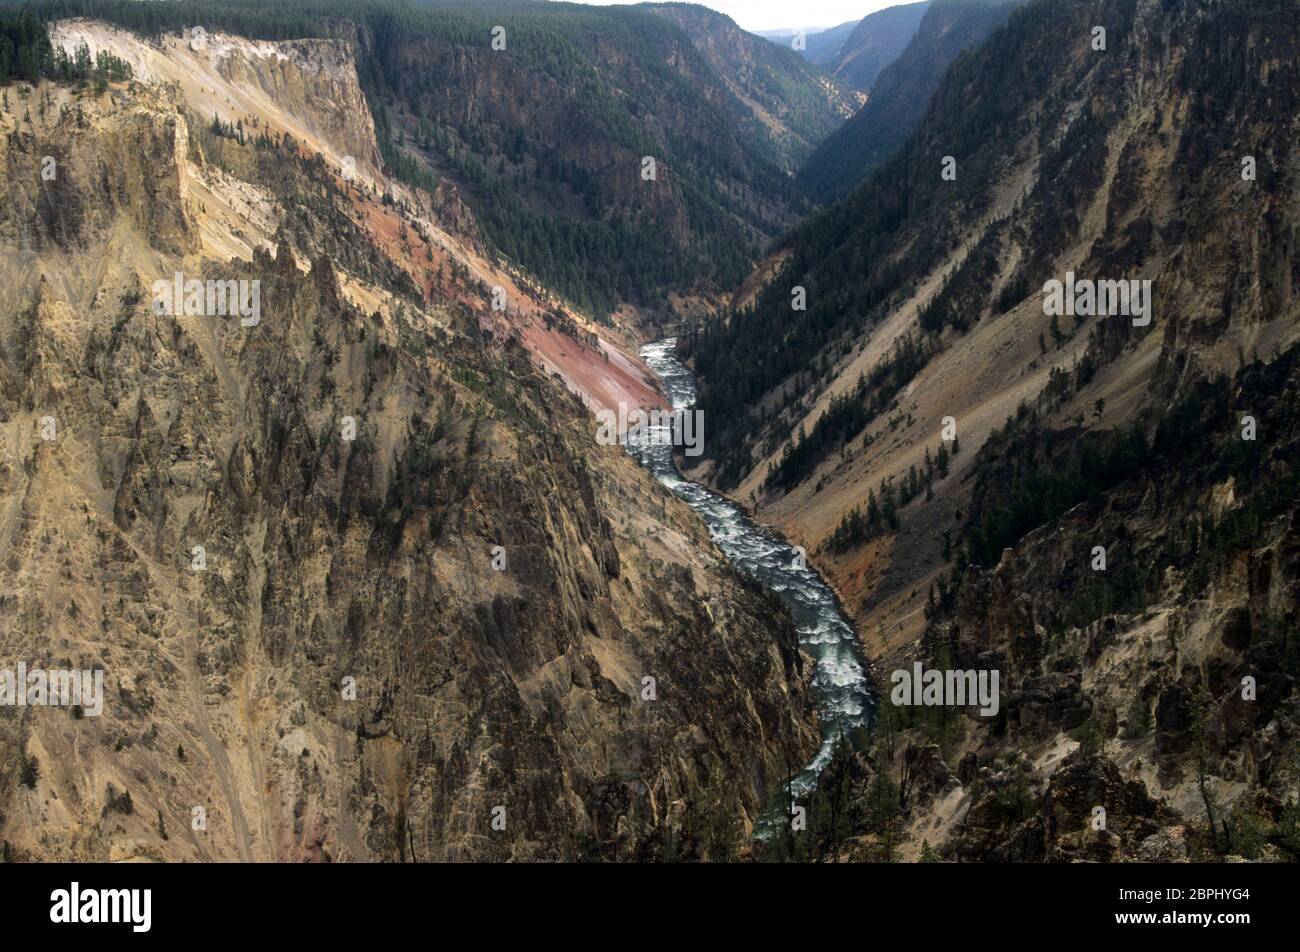 Grand Canyon of the Yellowstone cliffs from South Rim Trail, Yellowstone National Park, WY Stock Photo